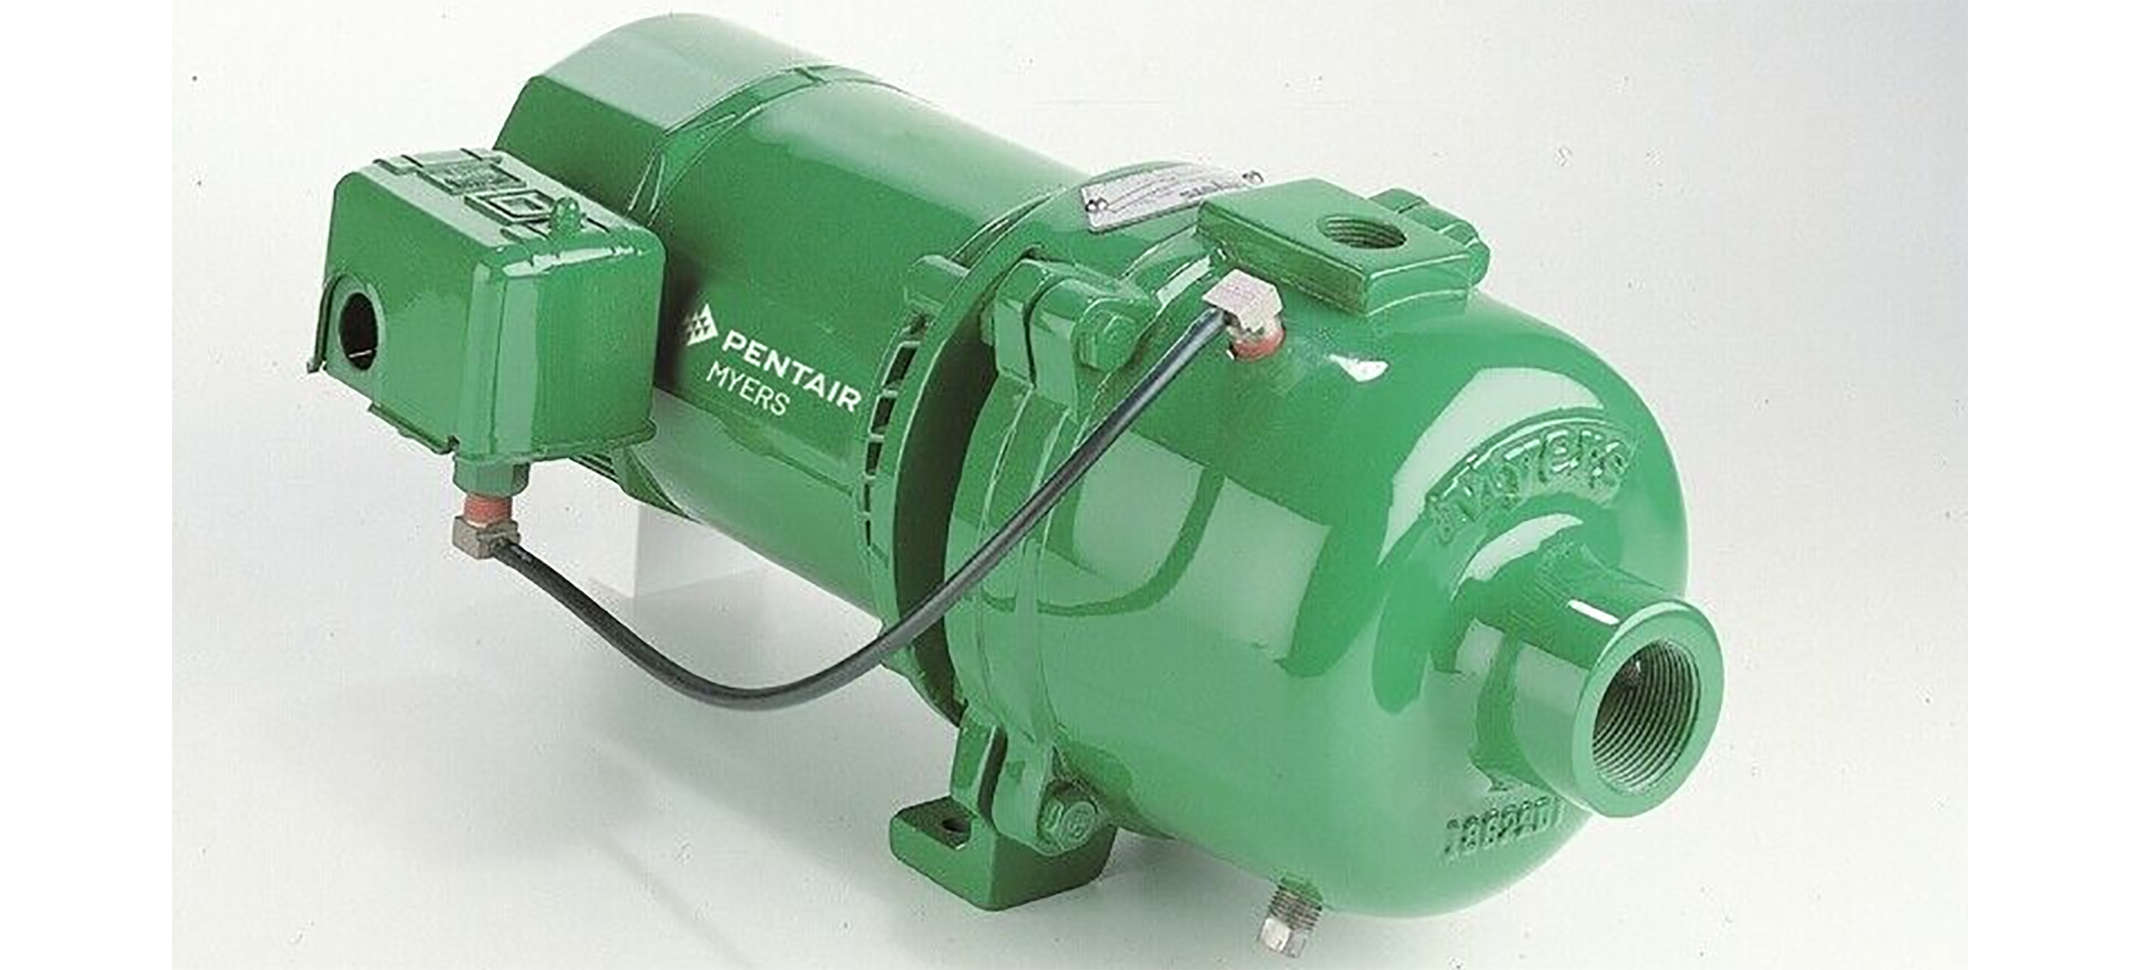 Myers HJ100S-01 1 hp Shallow Well Jet Pump